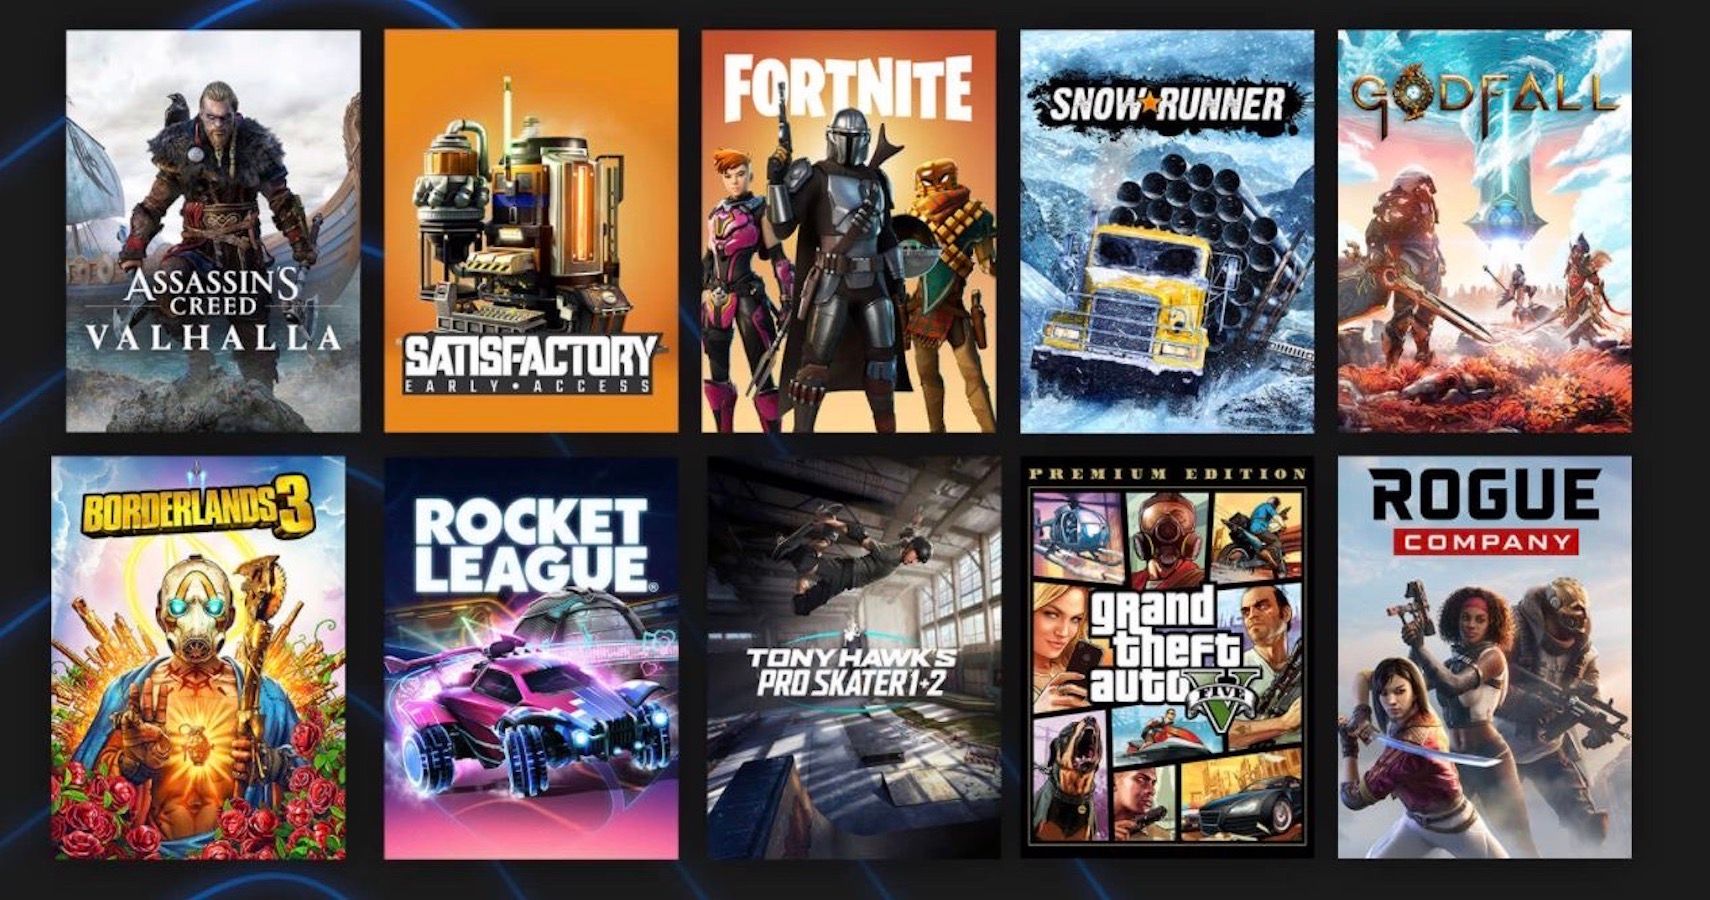 The best current and upcoming games on the Epic Games Store